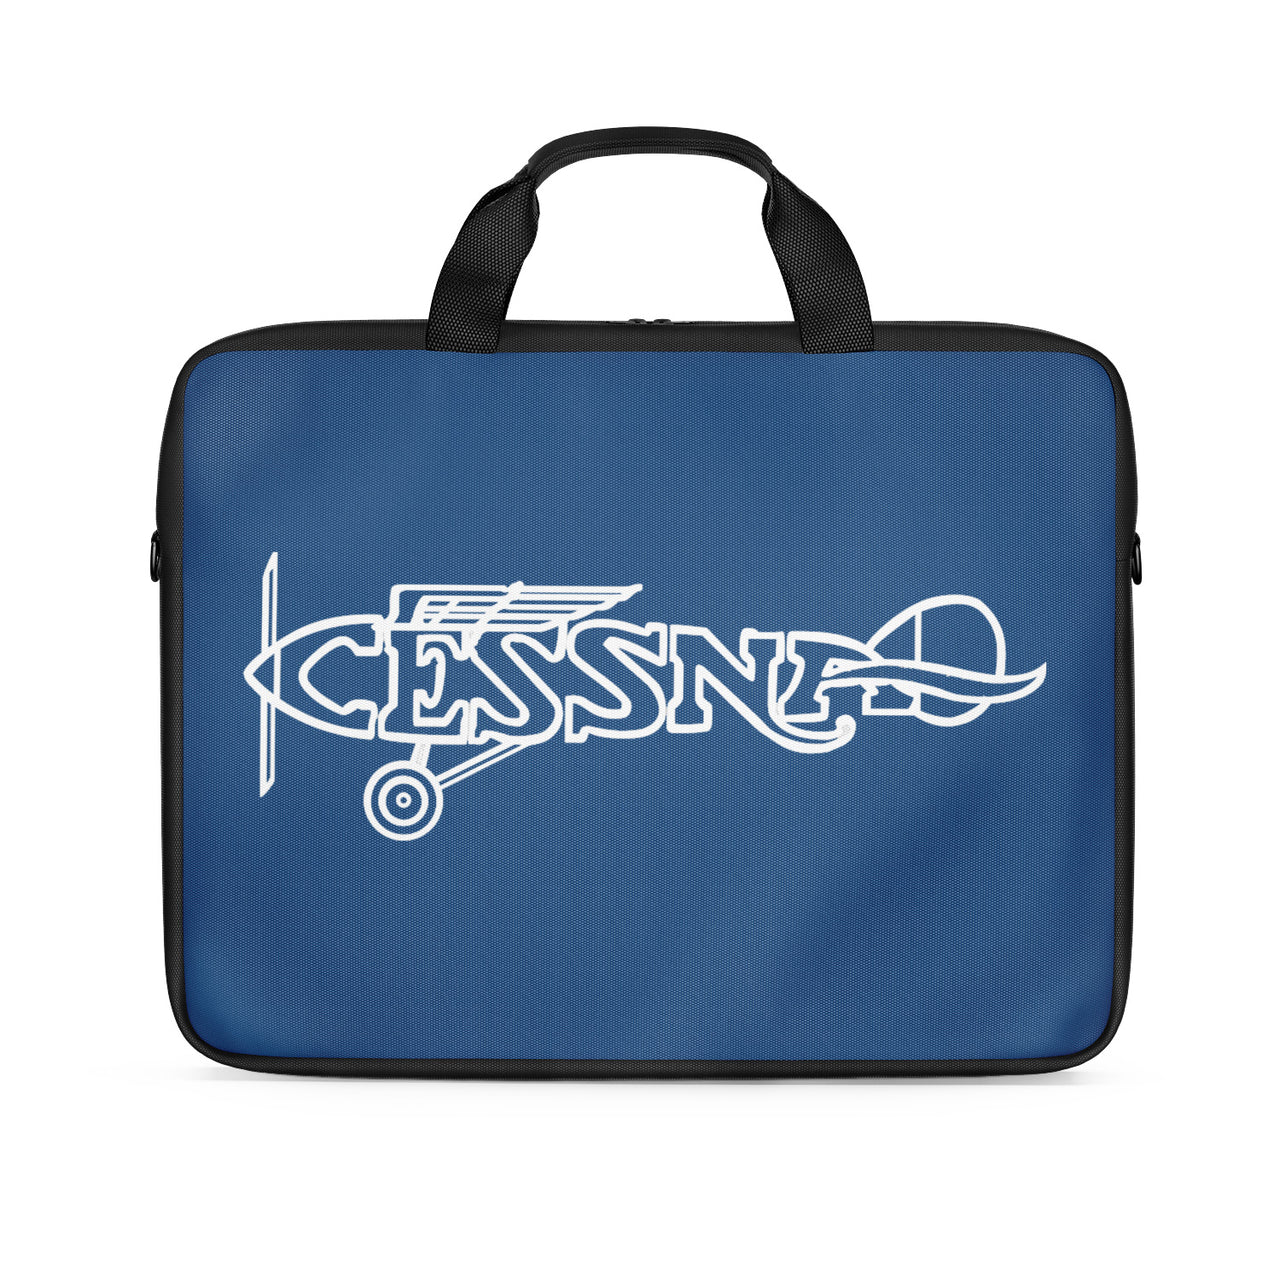 Special Cessna Text Designed Laptop & Tablet Bags